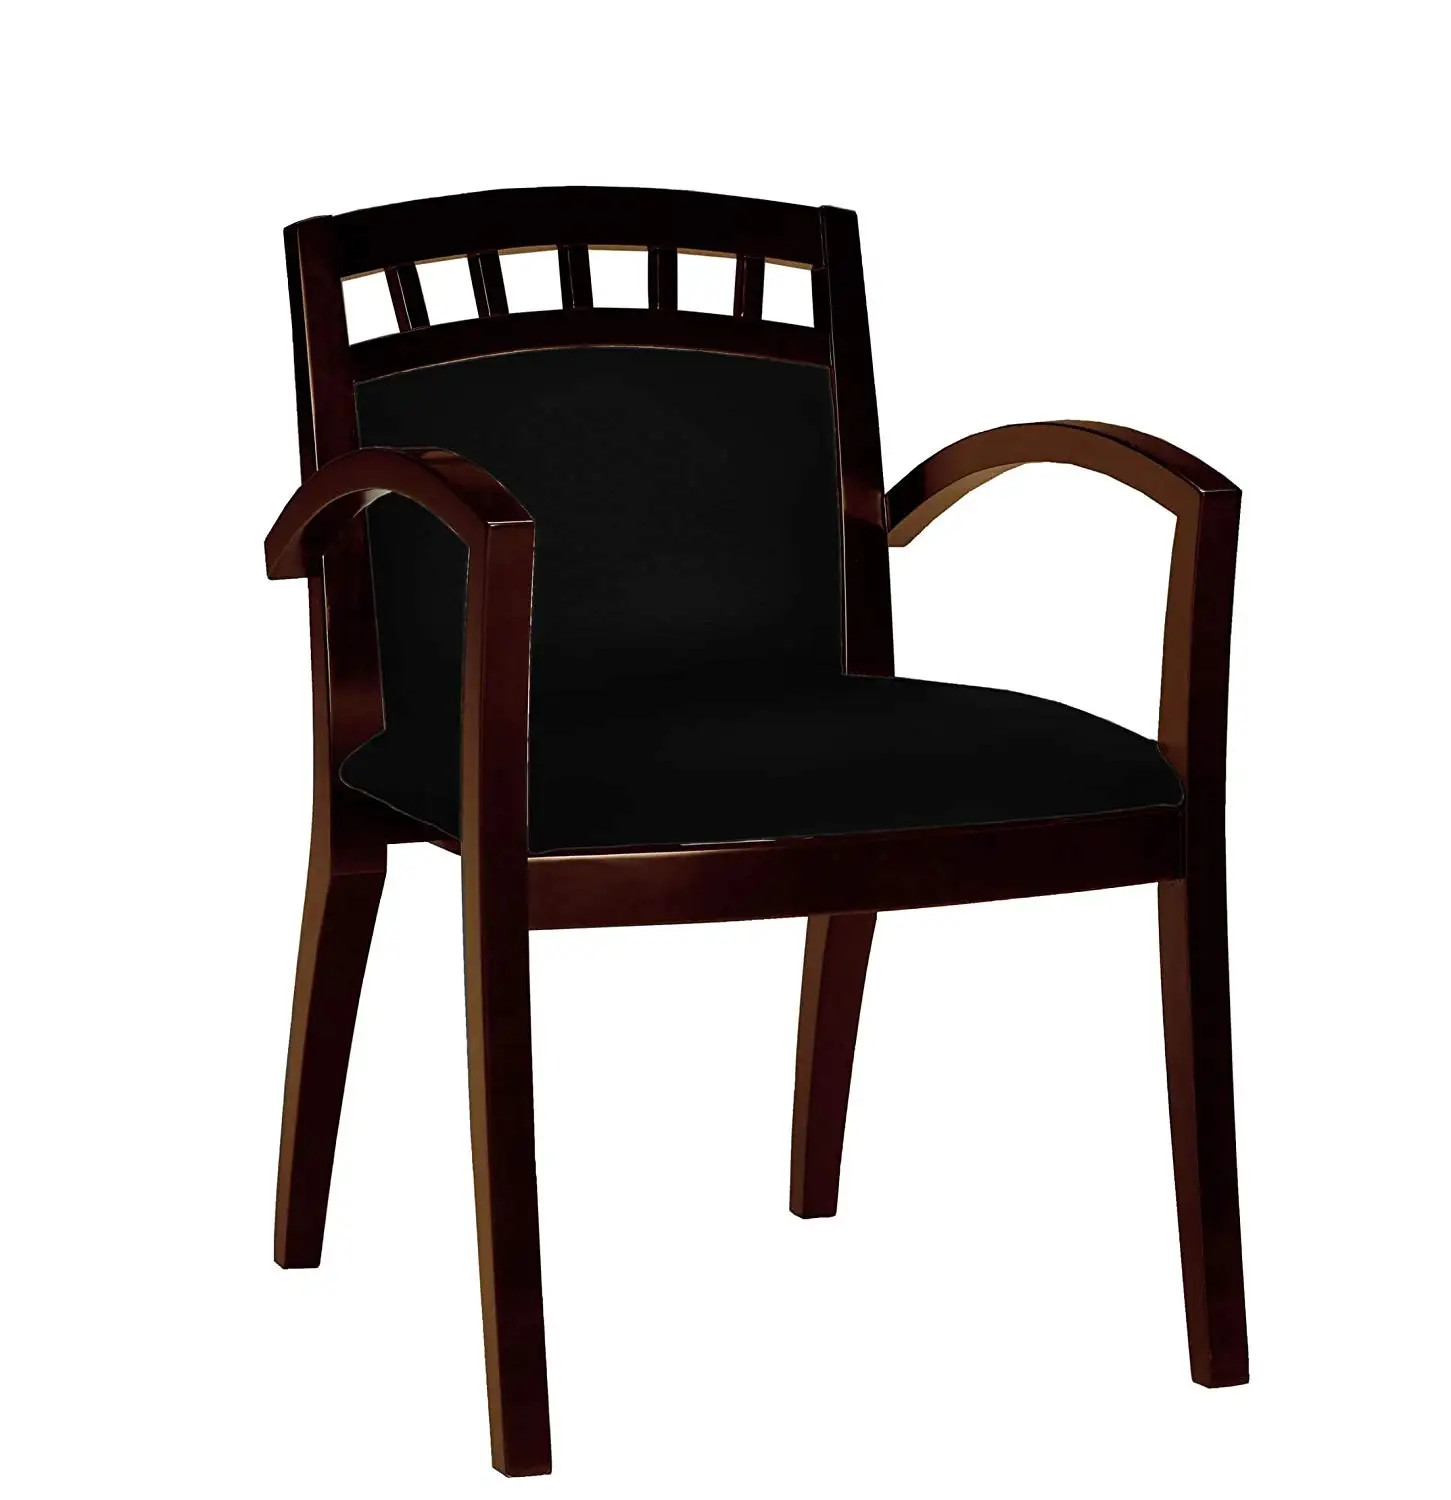 Cheap Waiting Room Chairs, find Waiting Room Chairs deals on line at